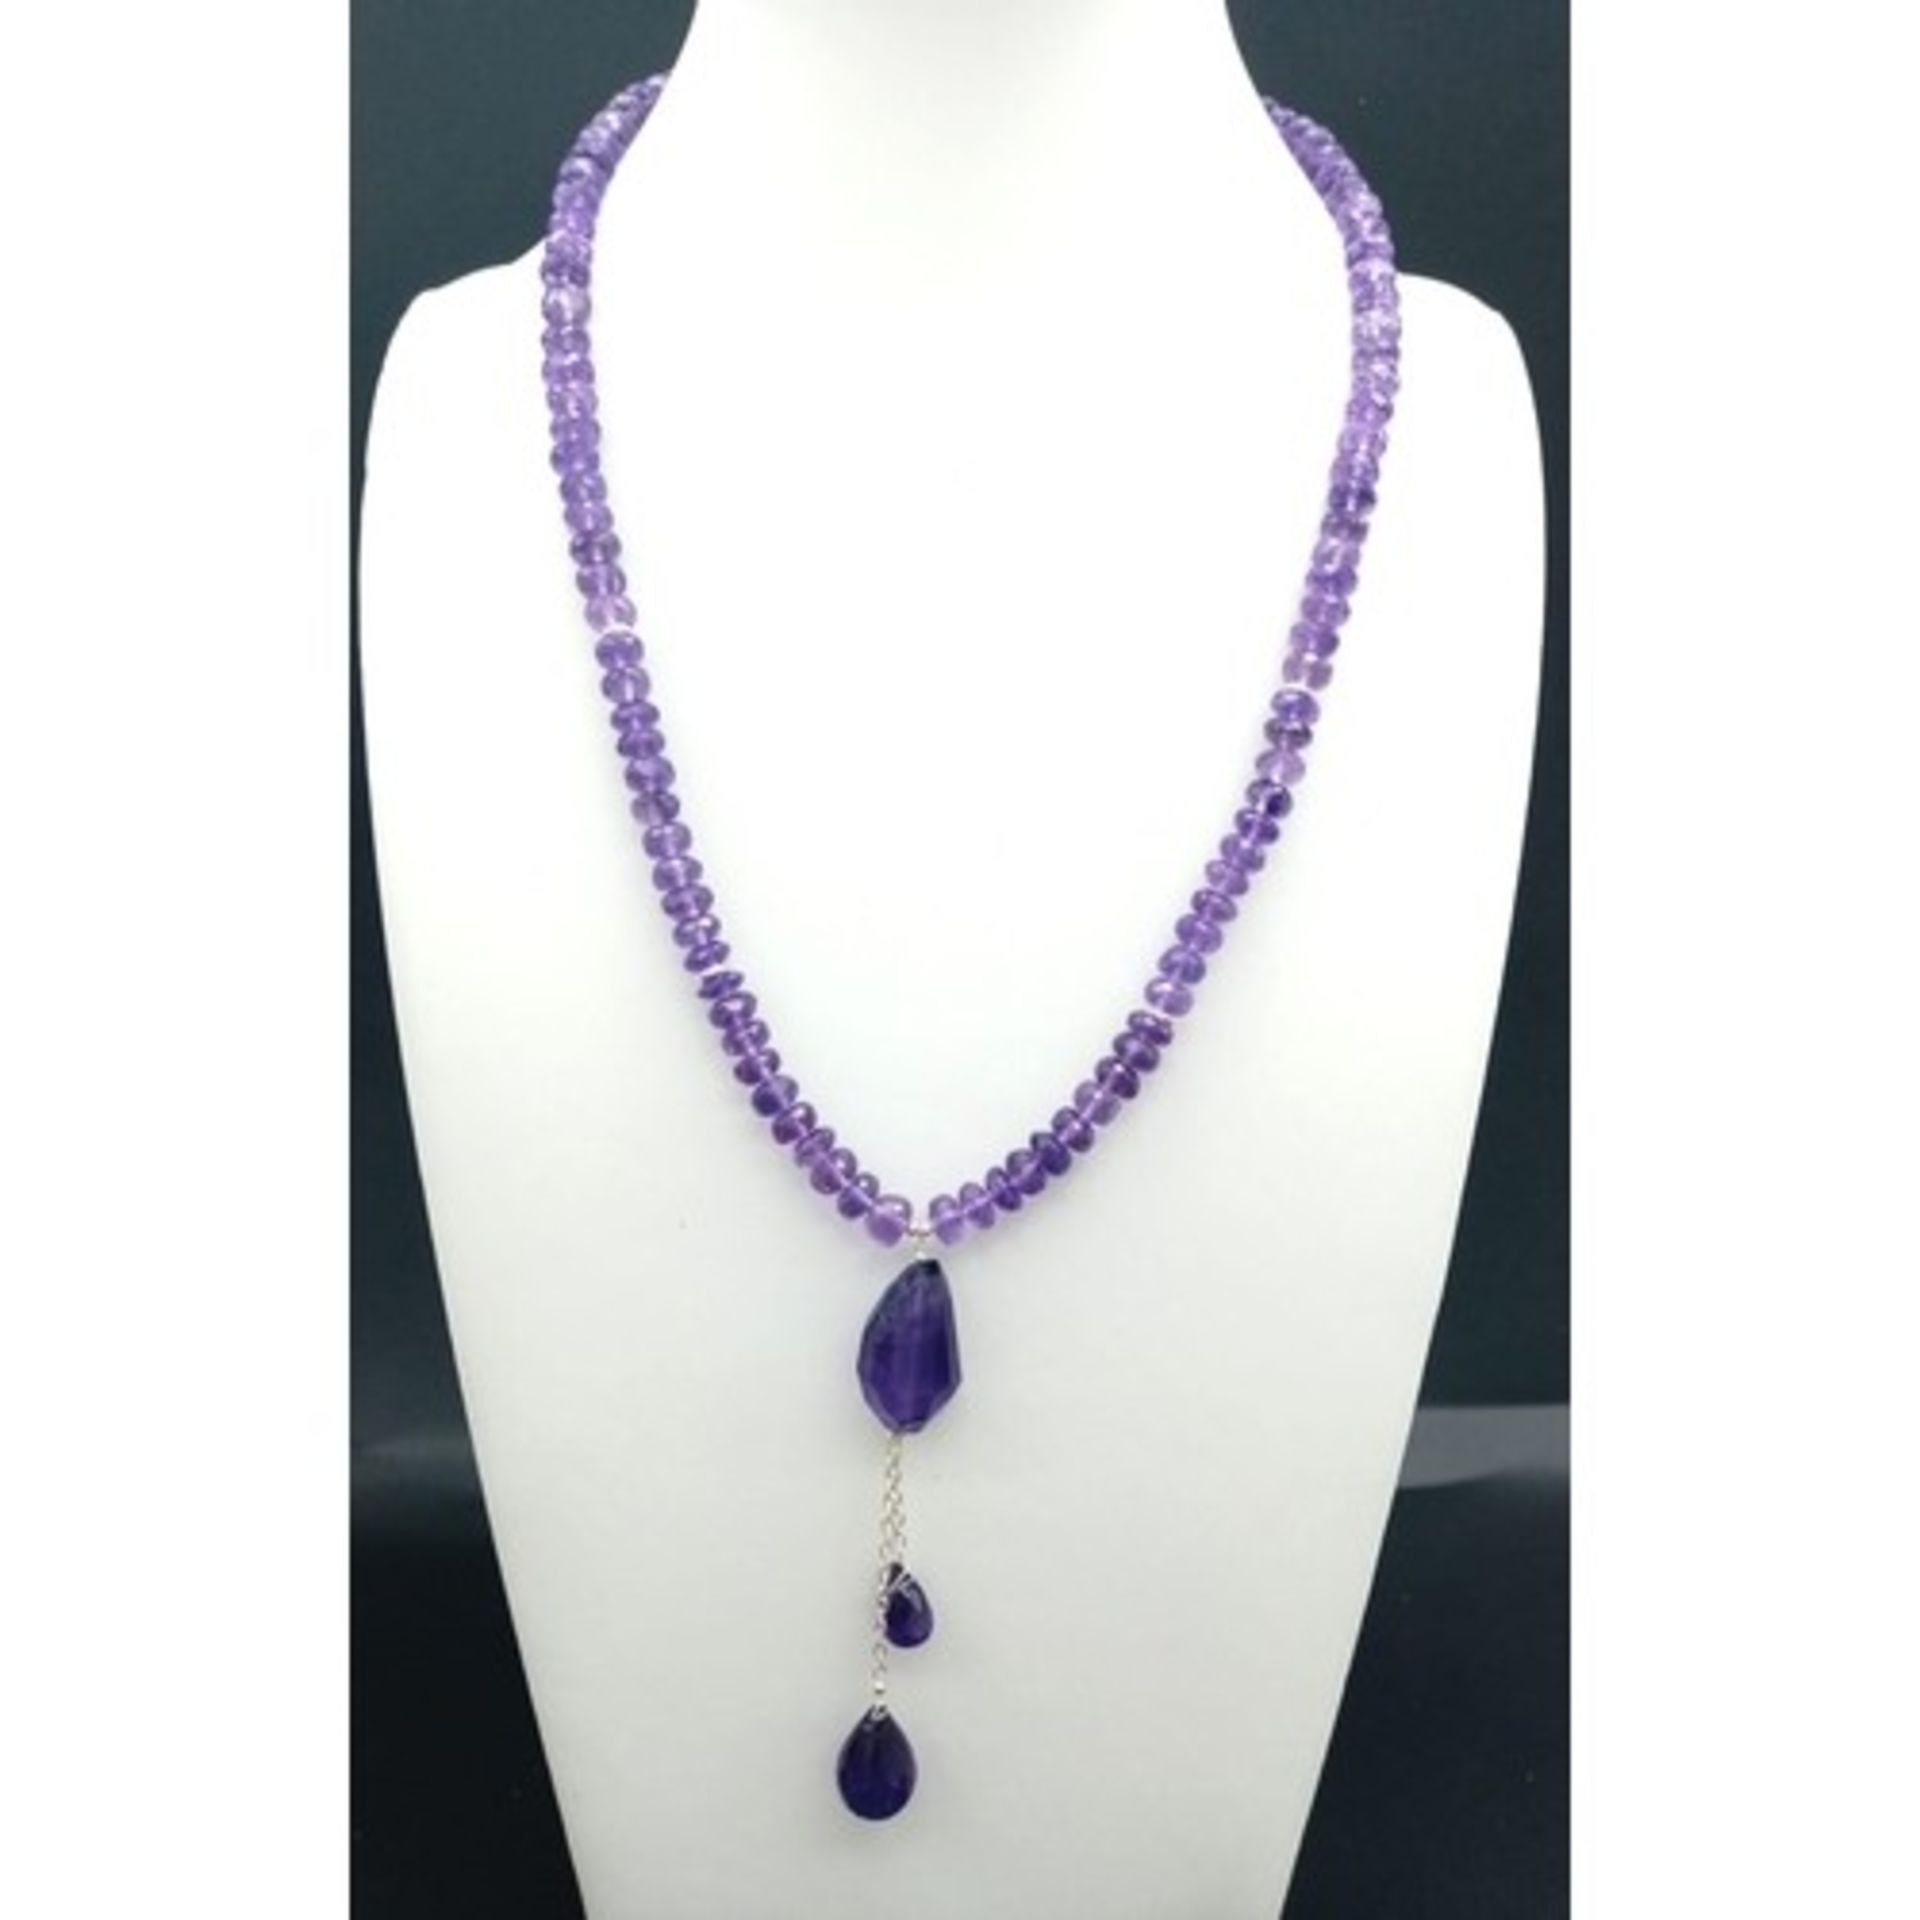 A 165ct Amethyst Gemstone Drop Necklace with a pair of amethyst drop Earrings. Necklace - 42cm - Image 3 of 5